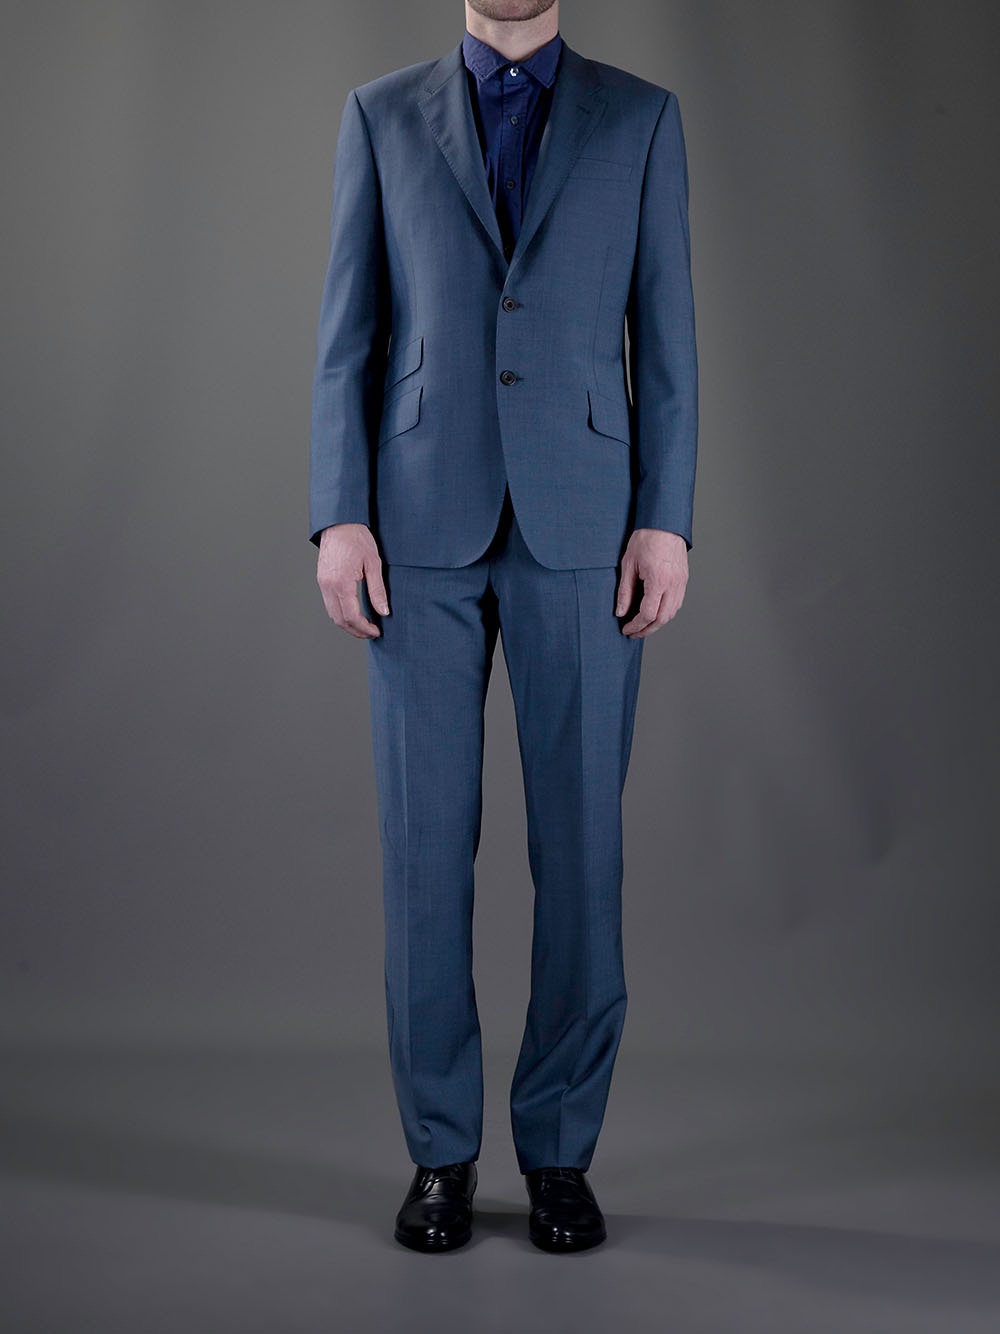 Navy blue suits... they're not just for bankers - L Squared Style